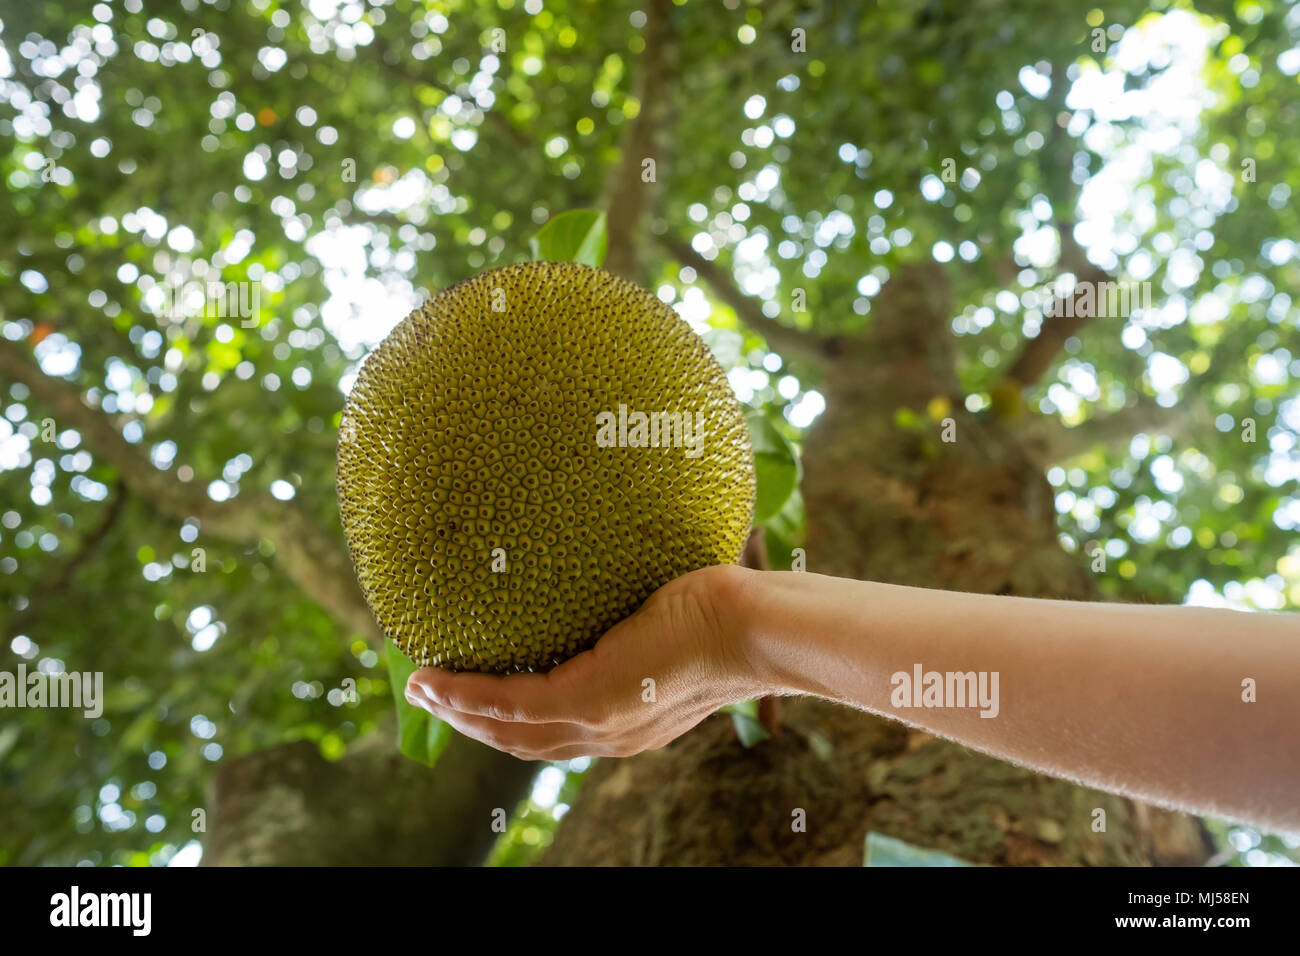 whole green jack fruit hanging from the tree close up photo Stock Photo